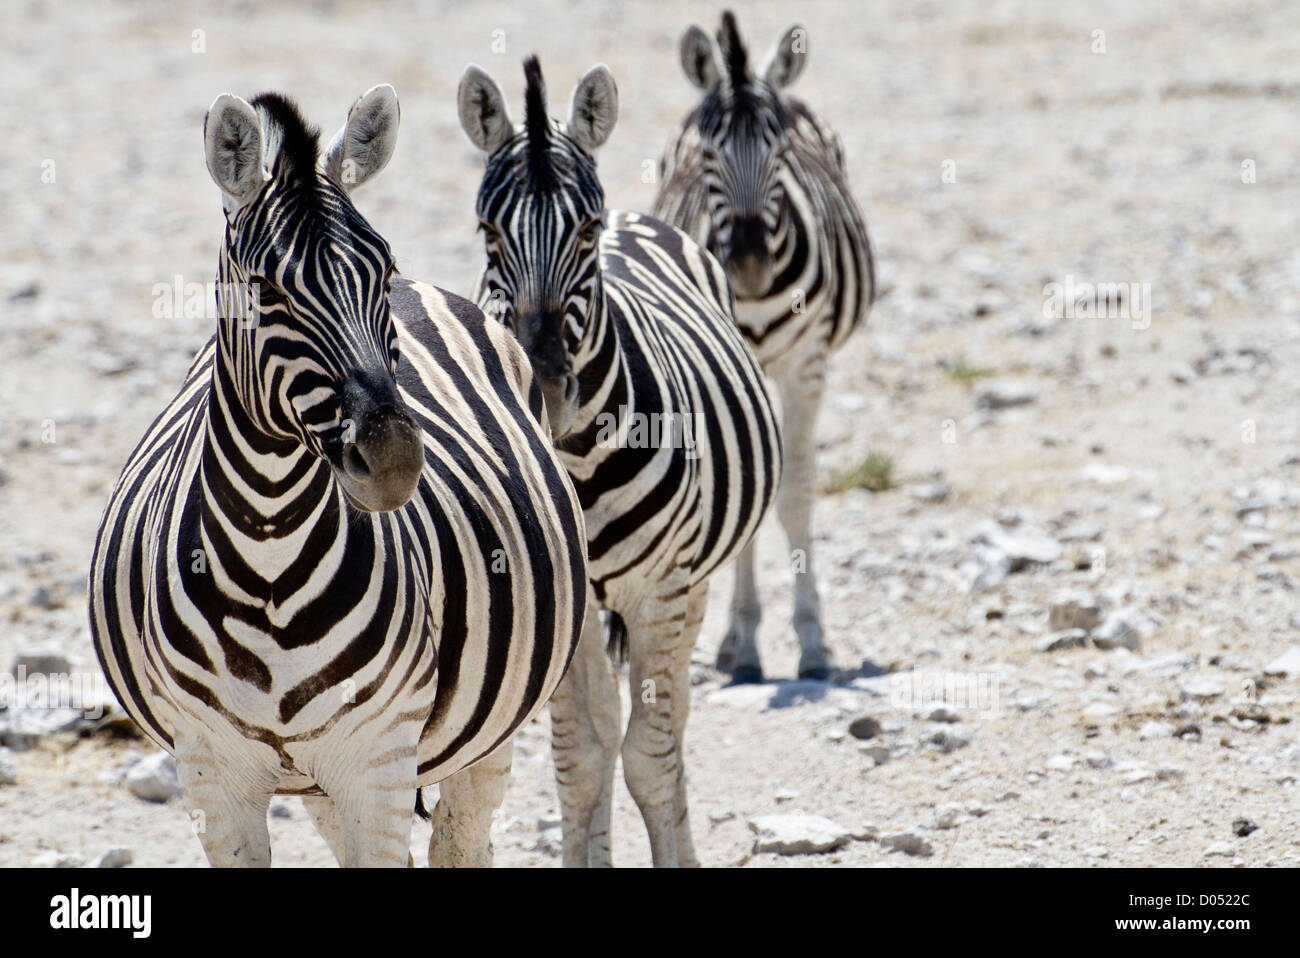 Three zebras one after another looking attentive Stock Photo